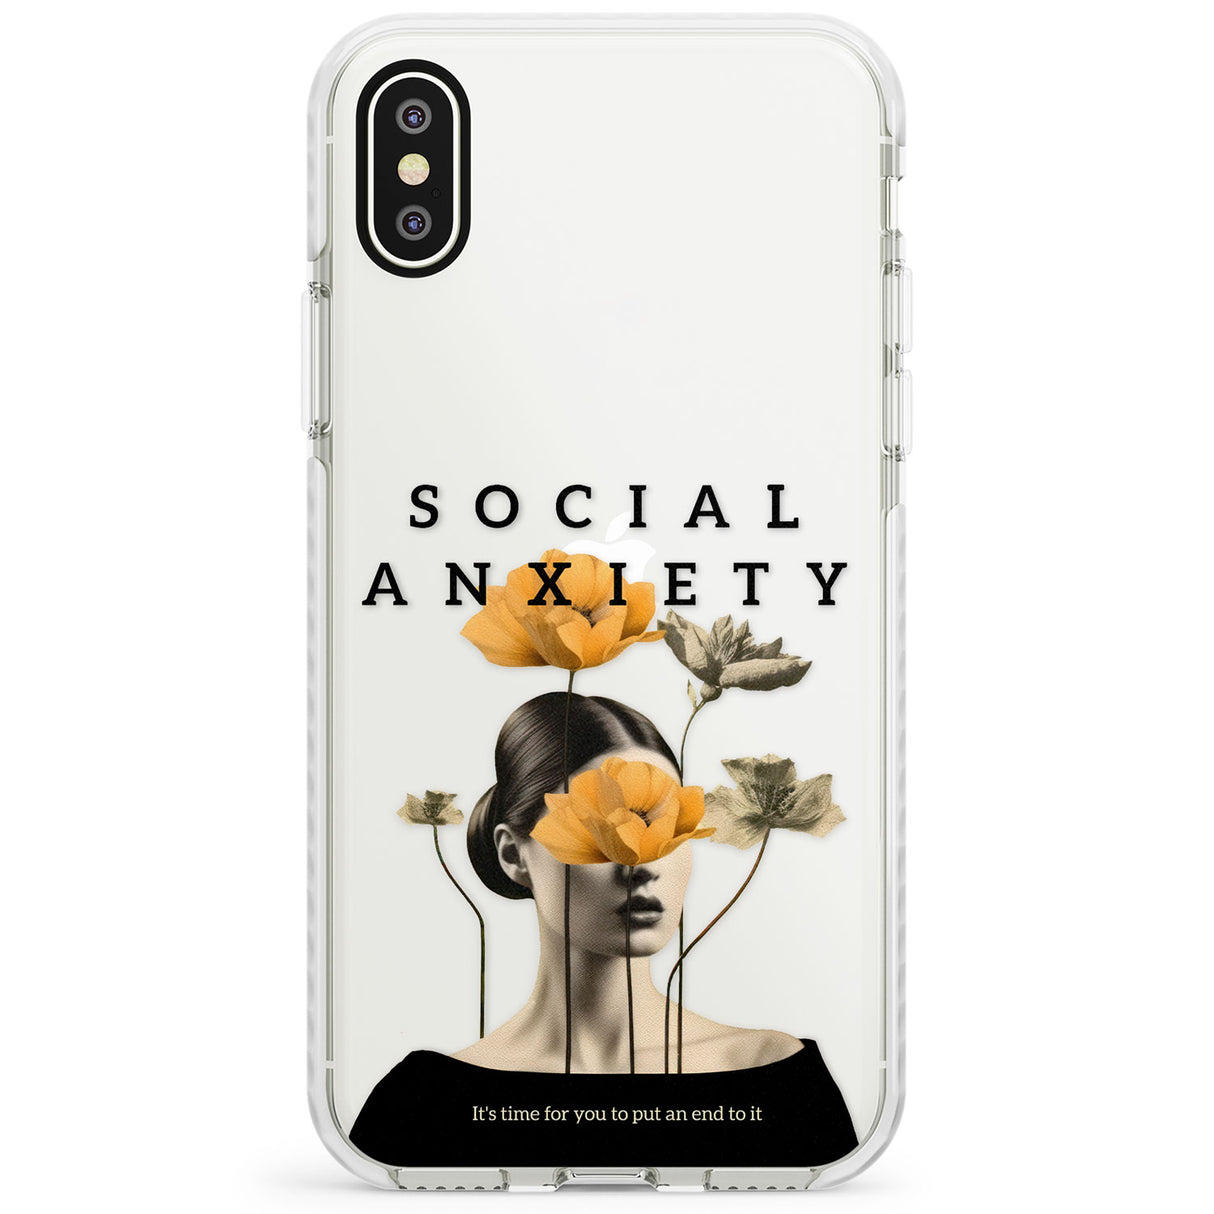 Social Anxiety Impact Phone Case for iPhone X XS Max XR